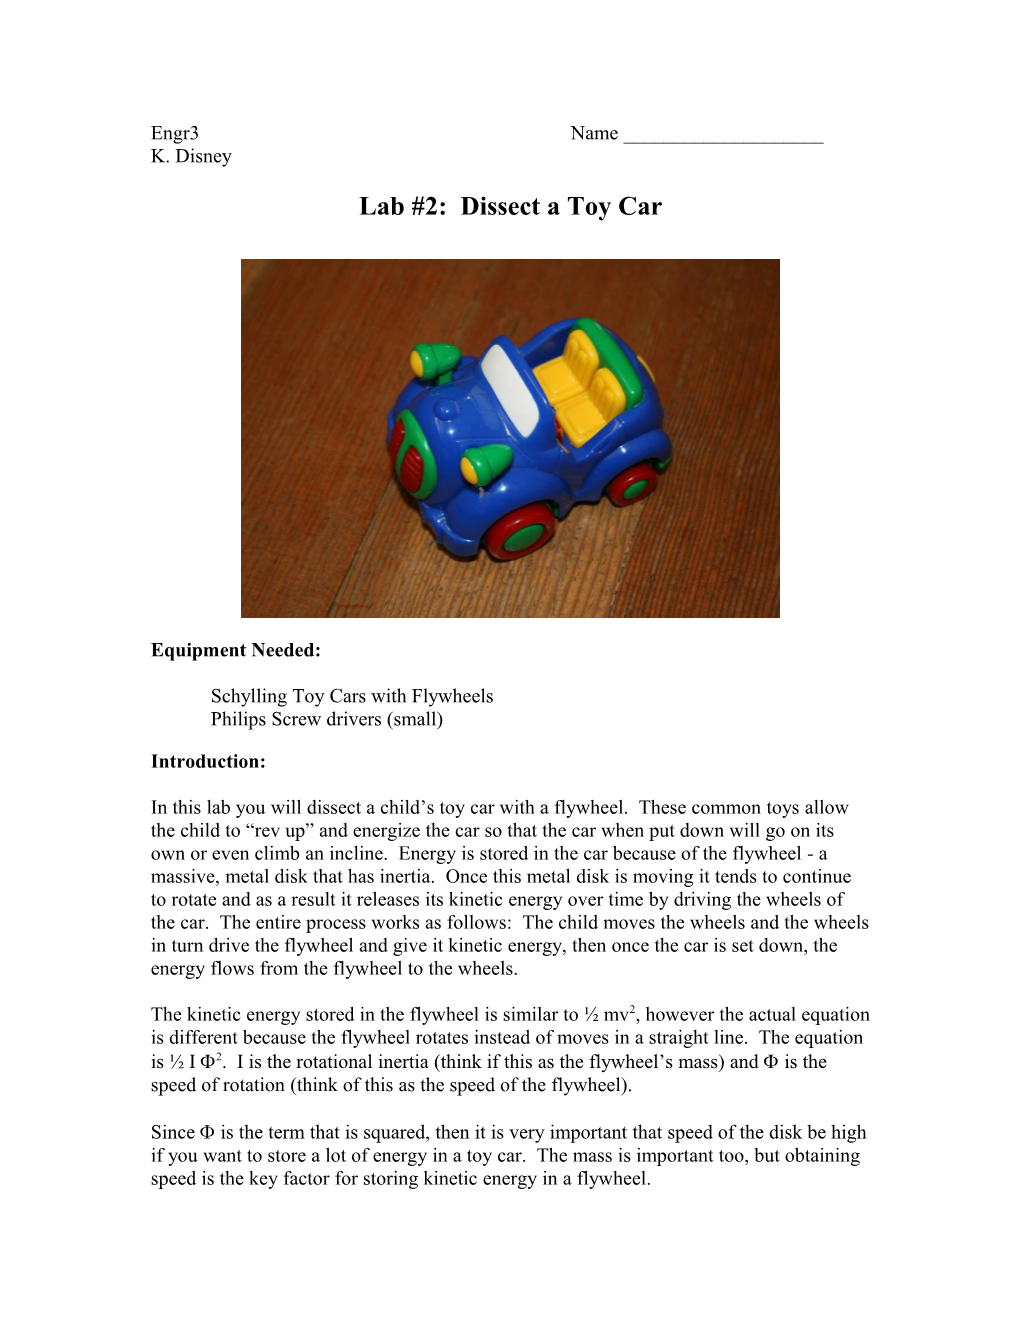 Lab #2: Dissect a Toy Car